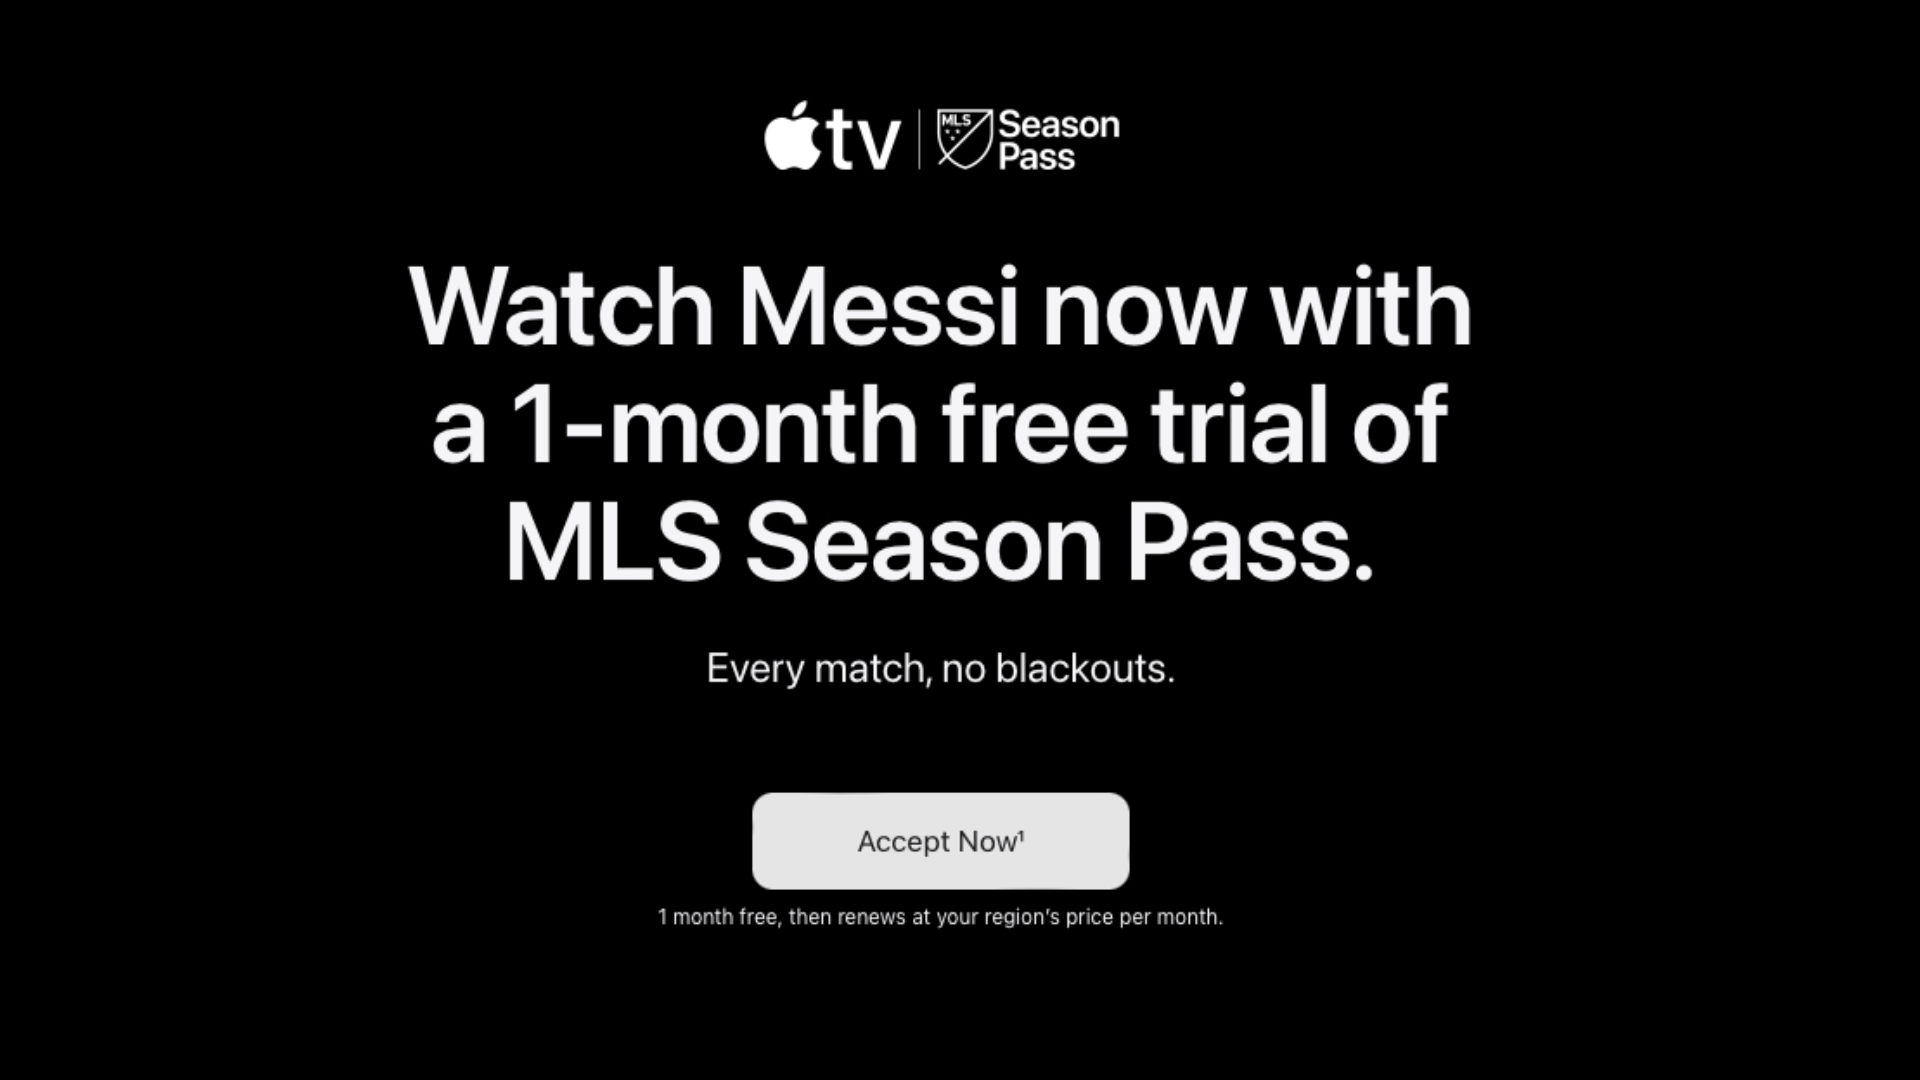 Lionel Messi Promotion Offers 1-Month Trial of Apple's MLS Season Pass